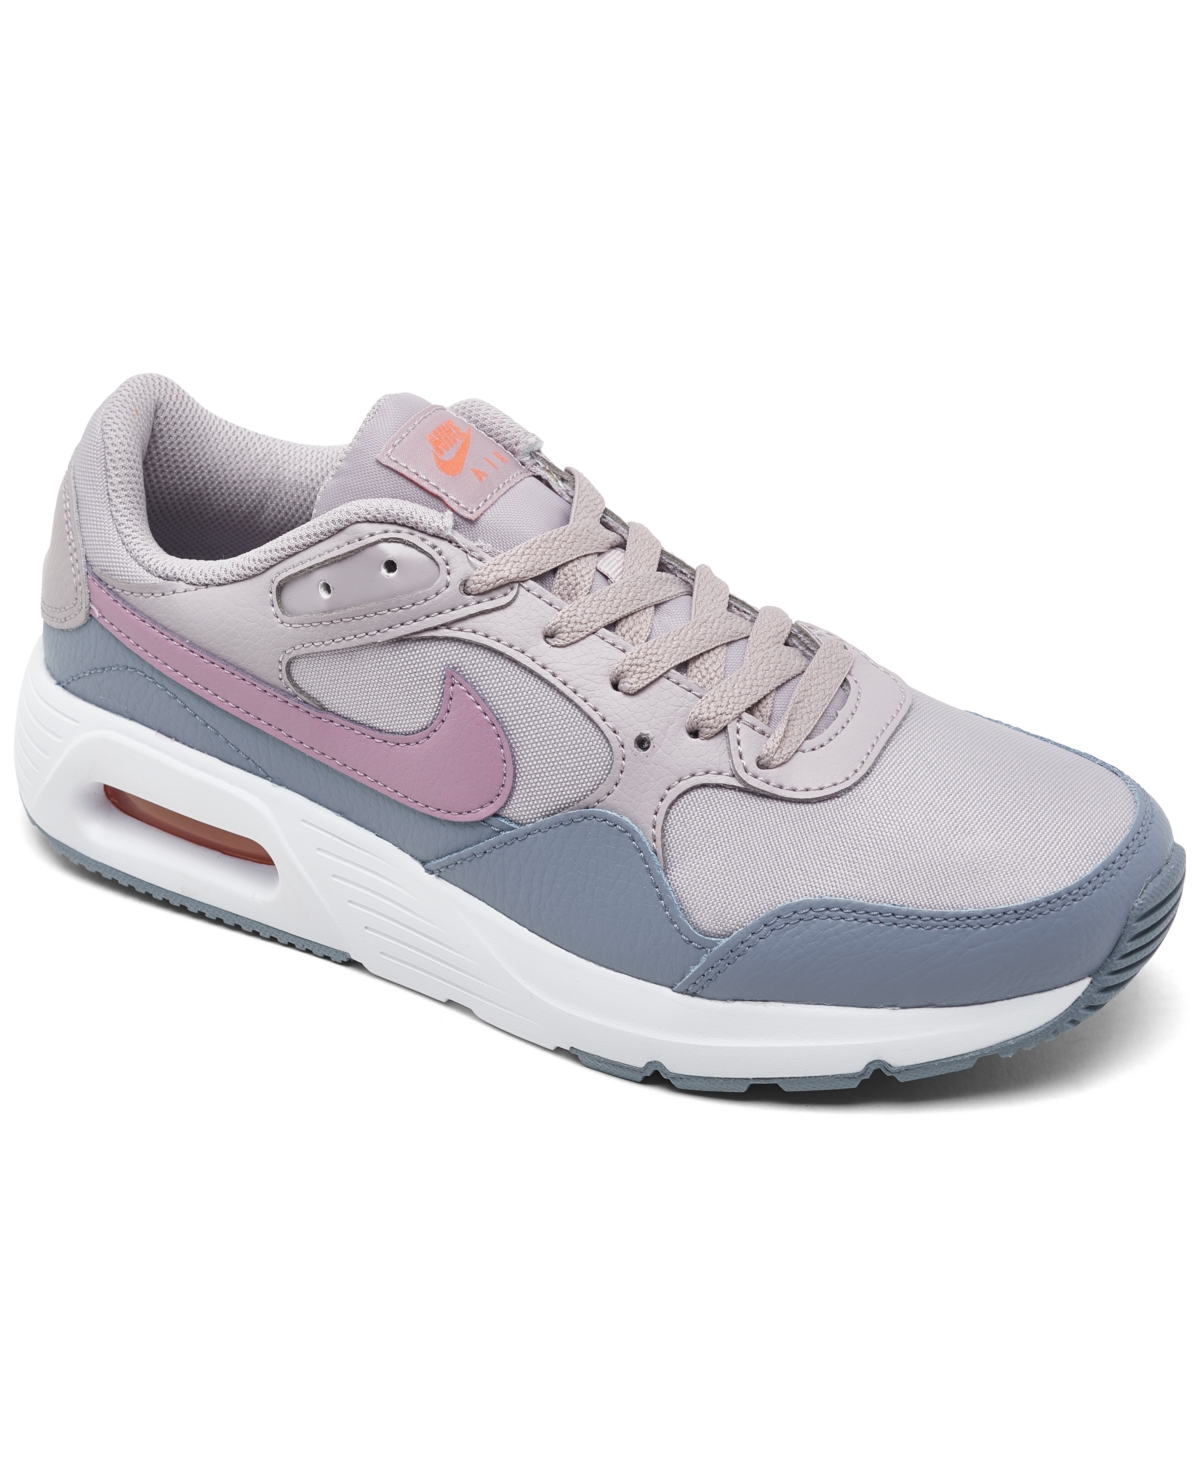 Women's Air Max Sc Casual Sneakers from Finish Line - Amethyst Ash, Ashen Slate